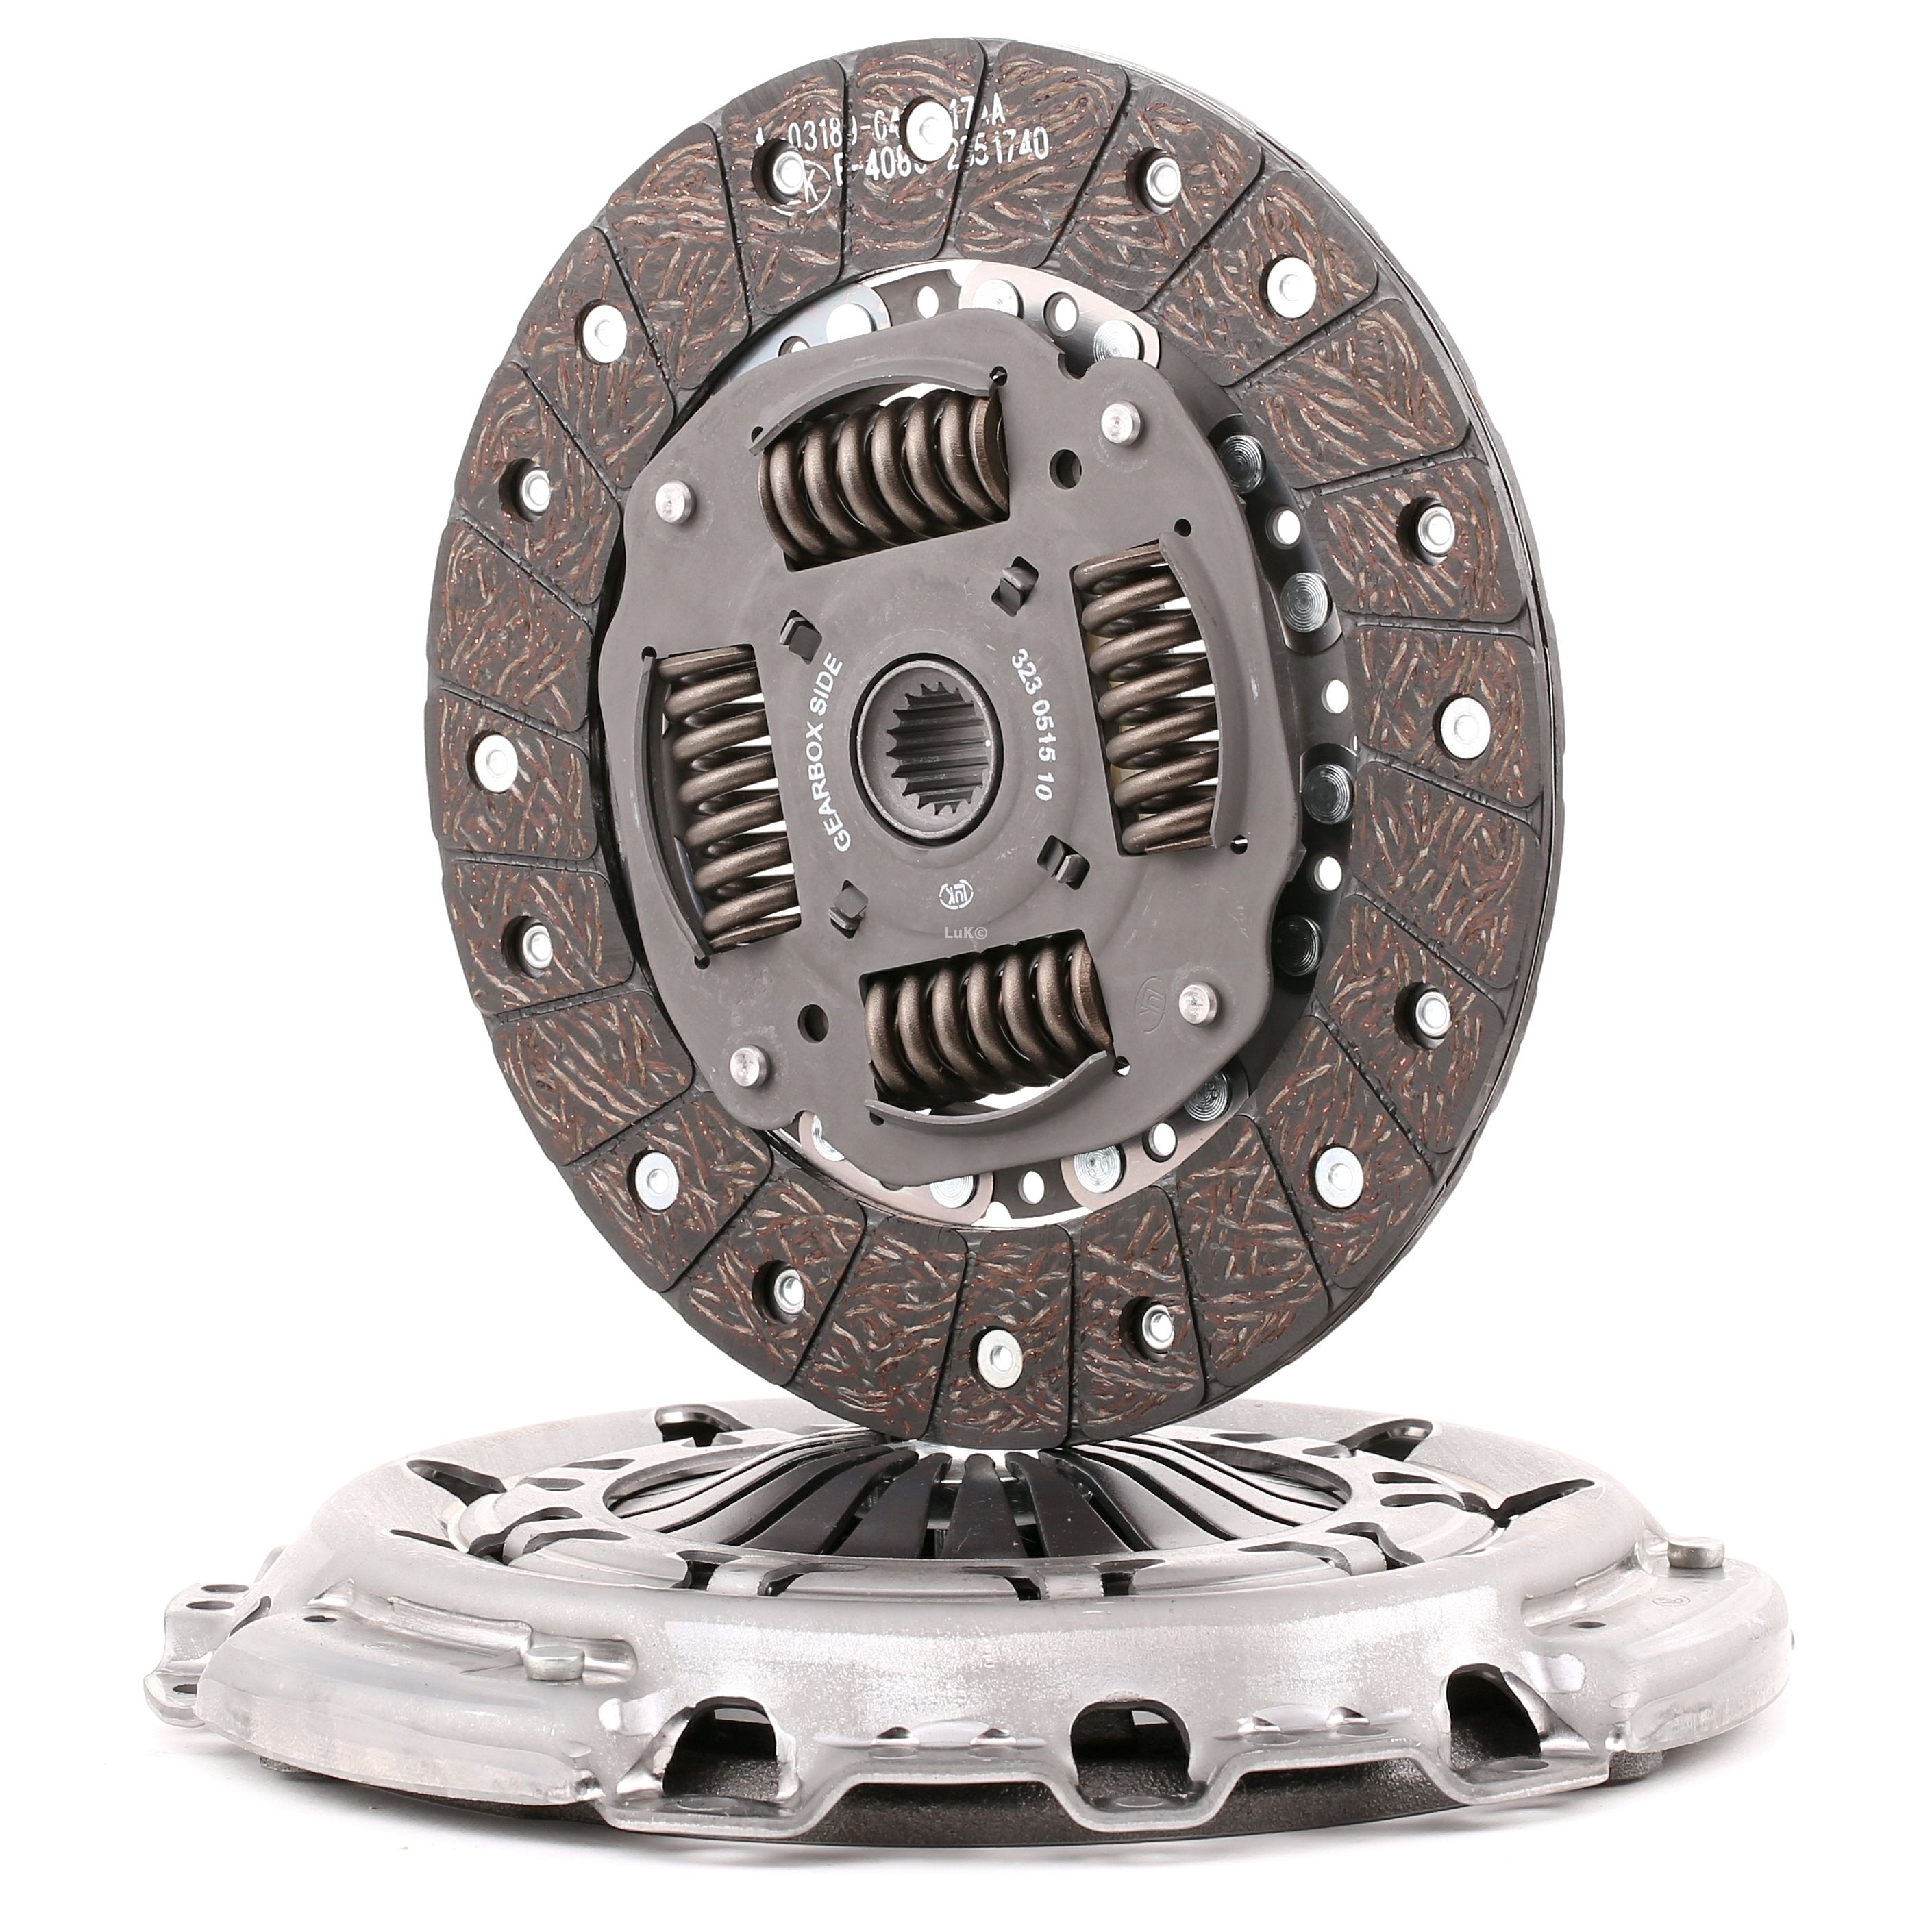 Clutch replacement kit LuK BR 0222 with clutch release bearing, with clutch disc, 230mm - 623 3043 00